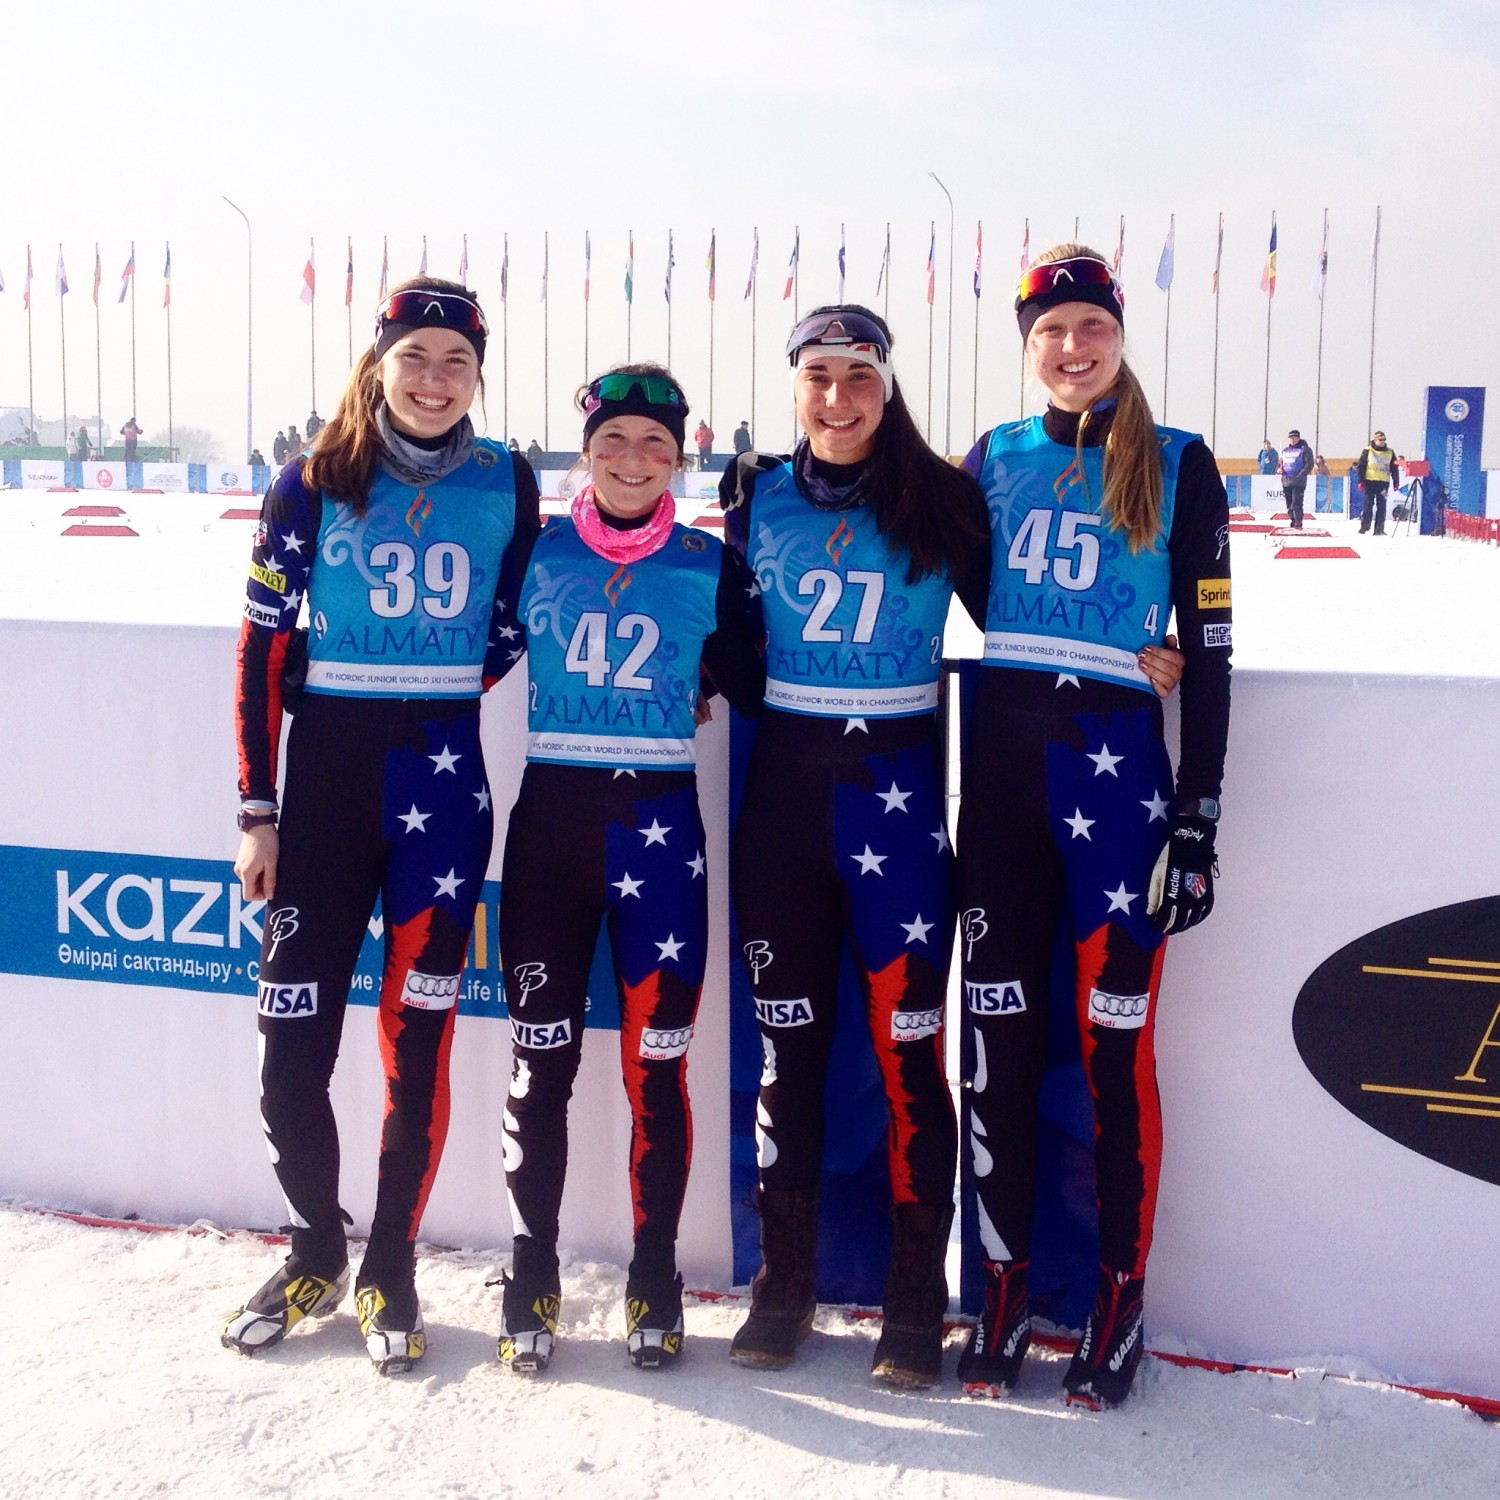 Photo Gallery: Almaty Junior Worlds in Review, Through the Eyes of U.S. Skiers